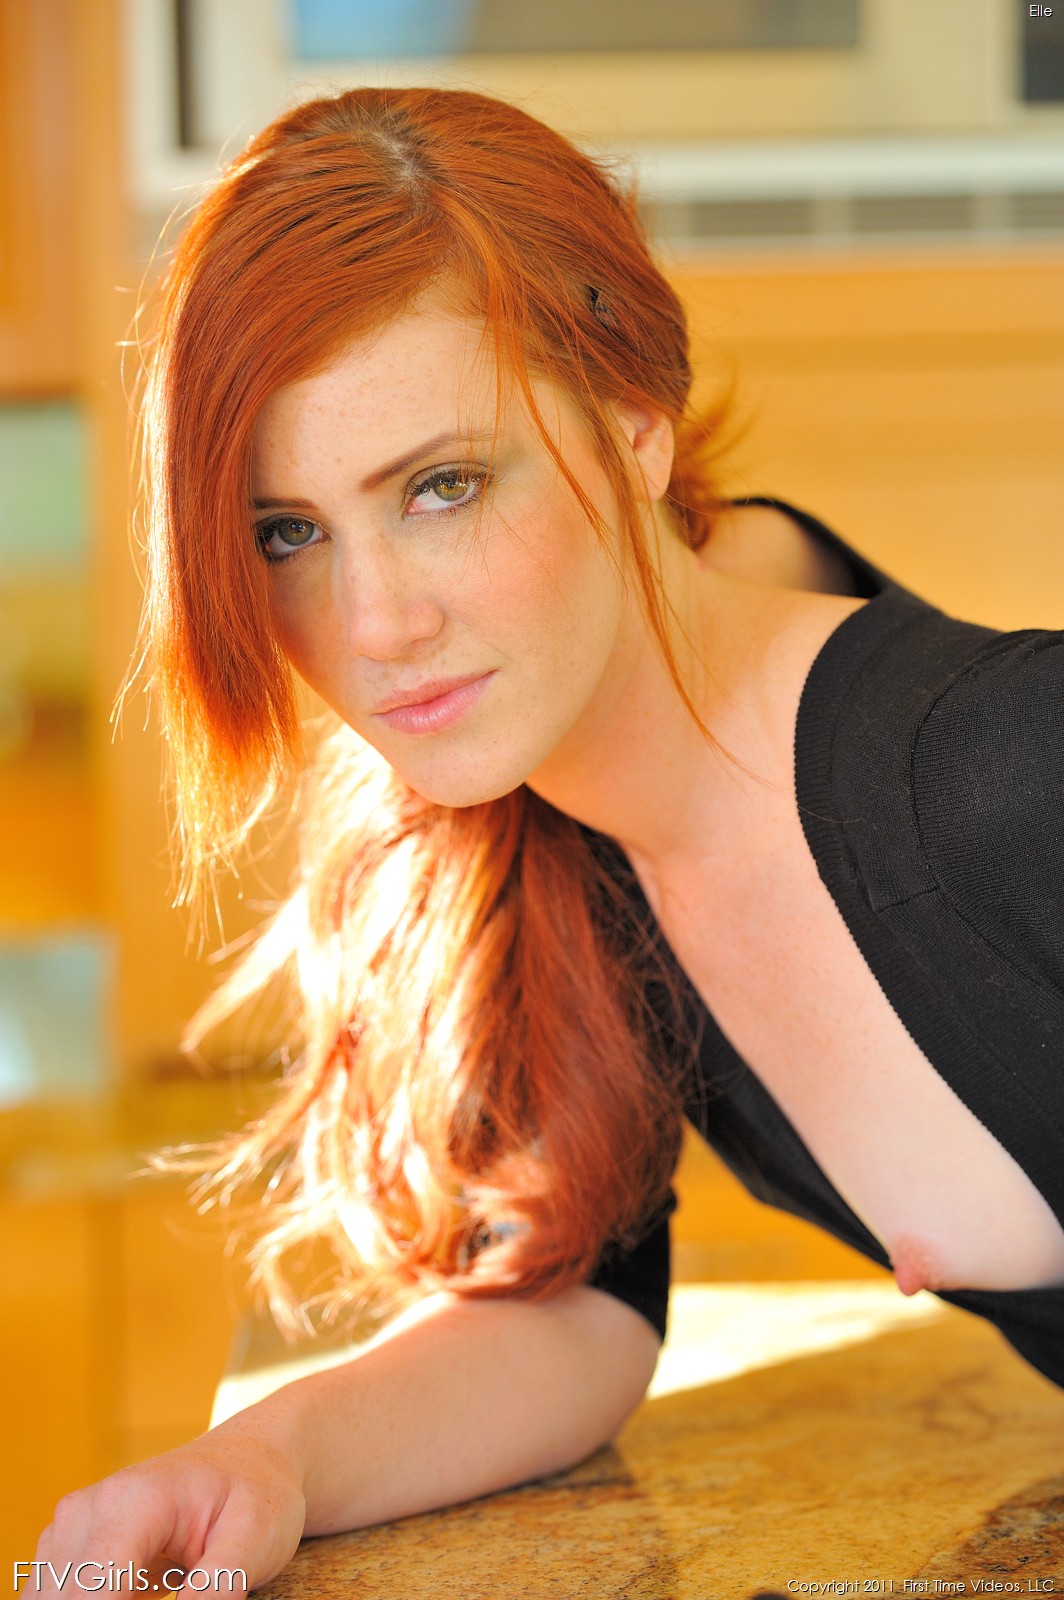 Elle Alexandra in Redheads have more fun - Sultry Redhead photo 38 of 62